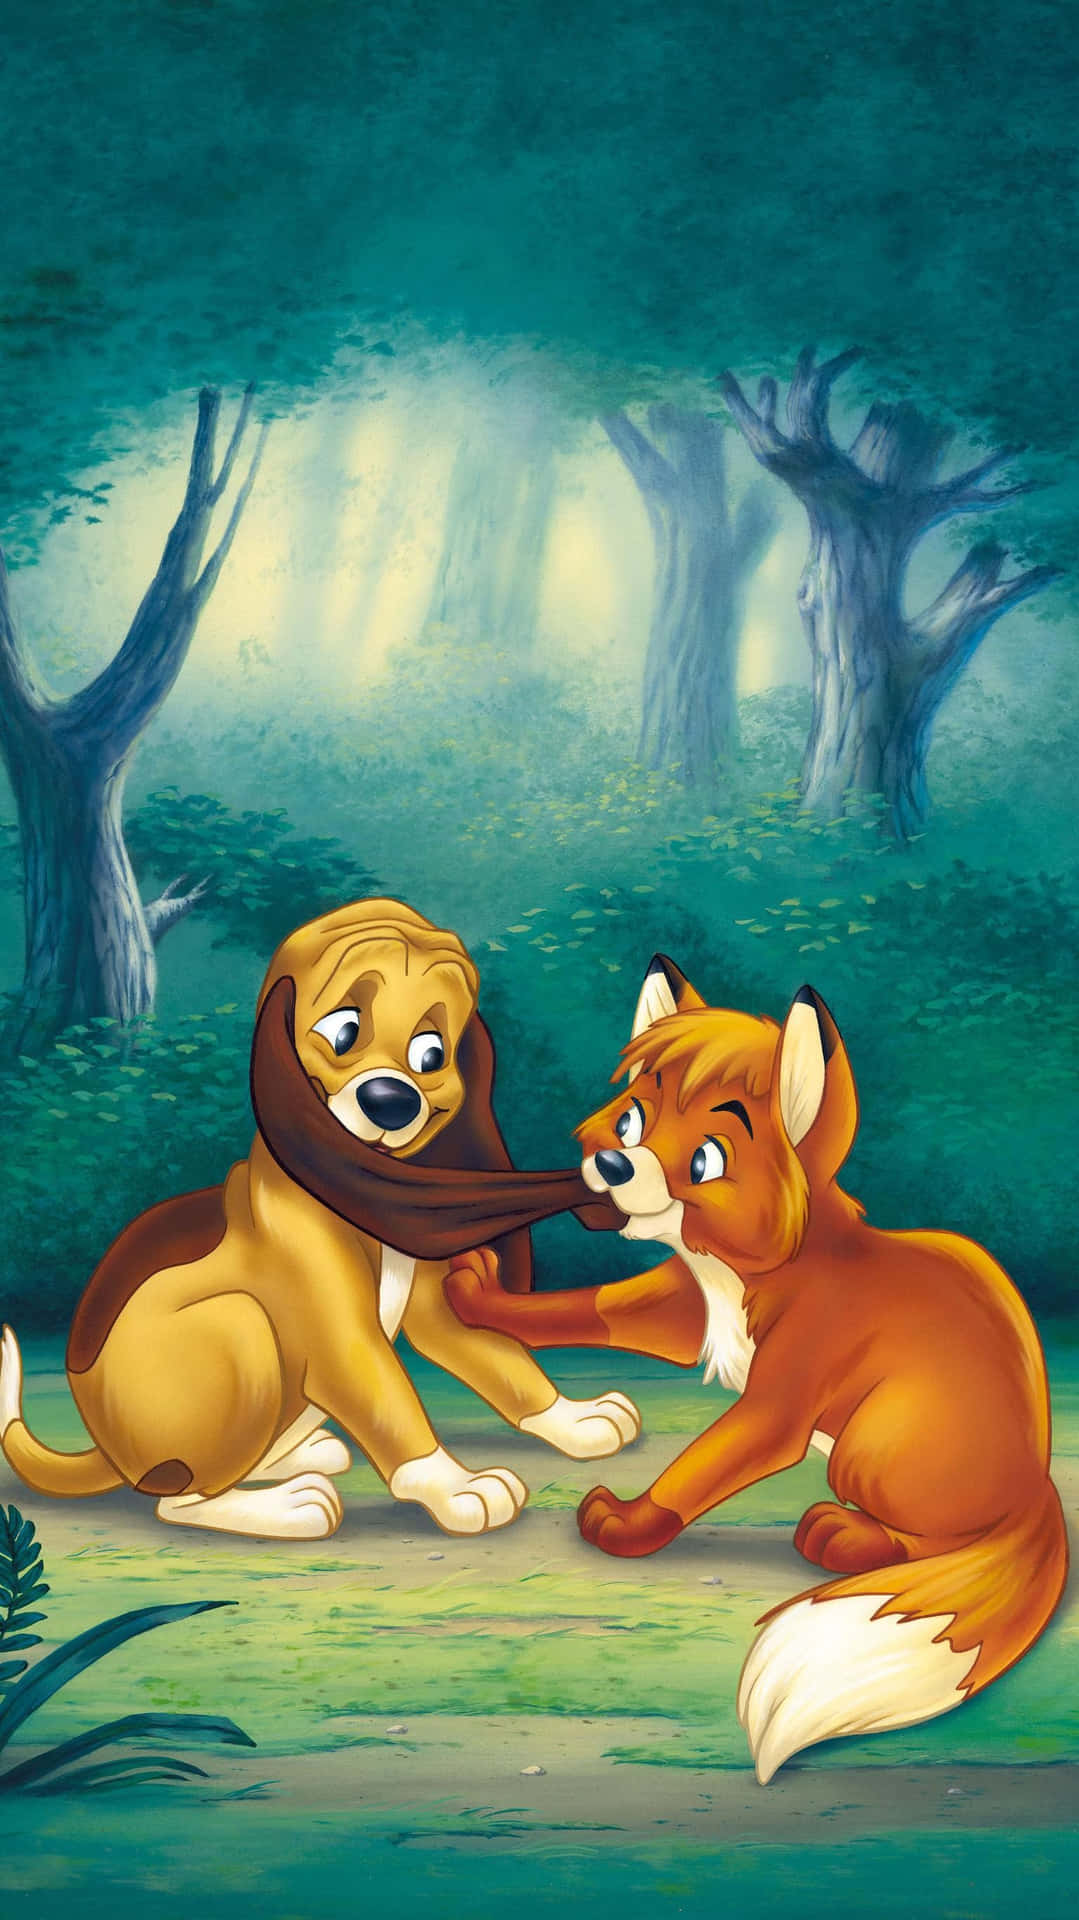 The Endearing Friendship Between Tod And Copper In The Fox And The Hound